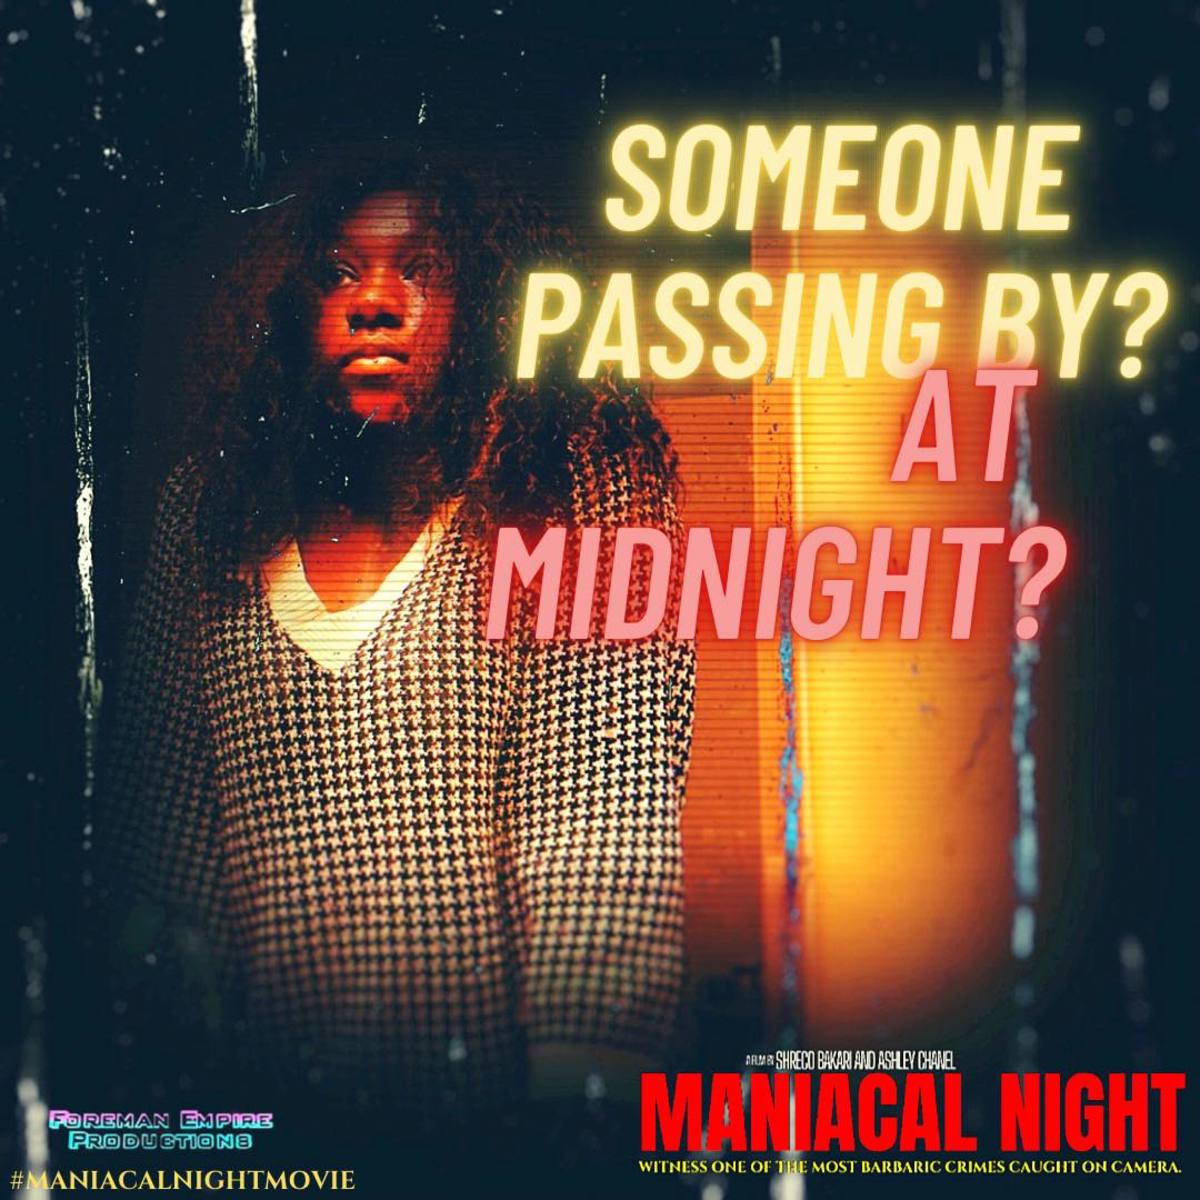 maniacal-night-the-crime-that-shook-georgia-to-be-adapted-as-a-film-by-acclaimed-horror-director-shreco-bakari